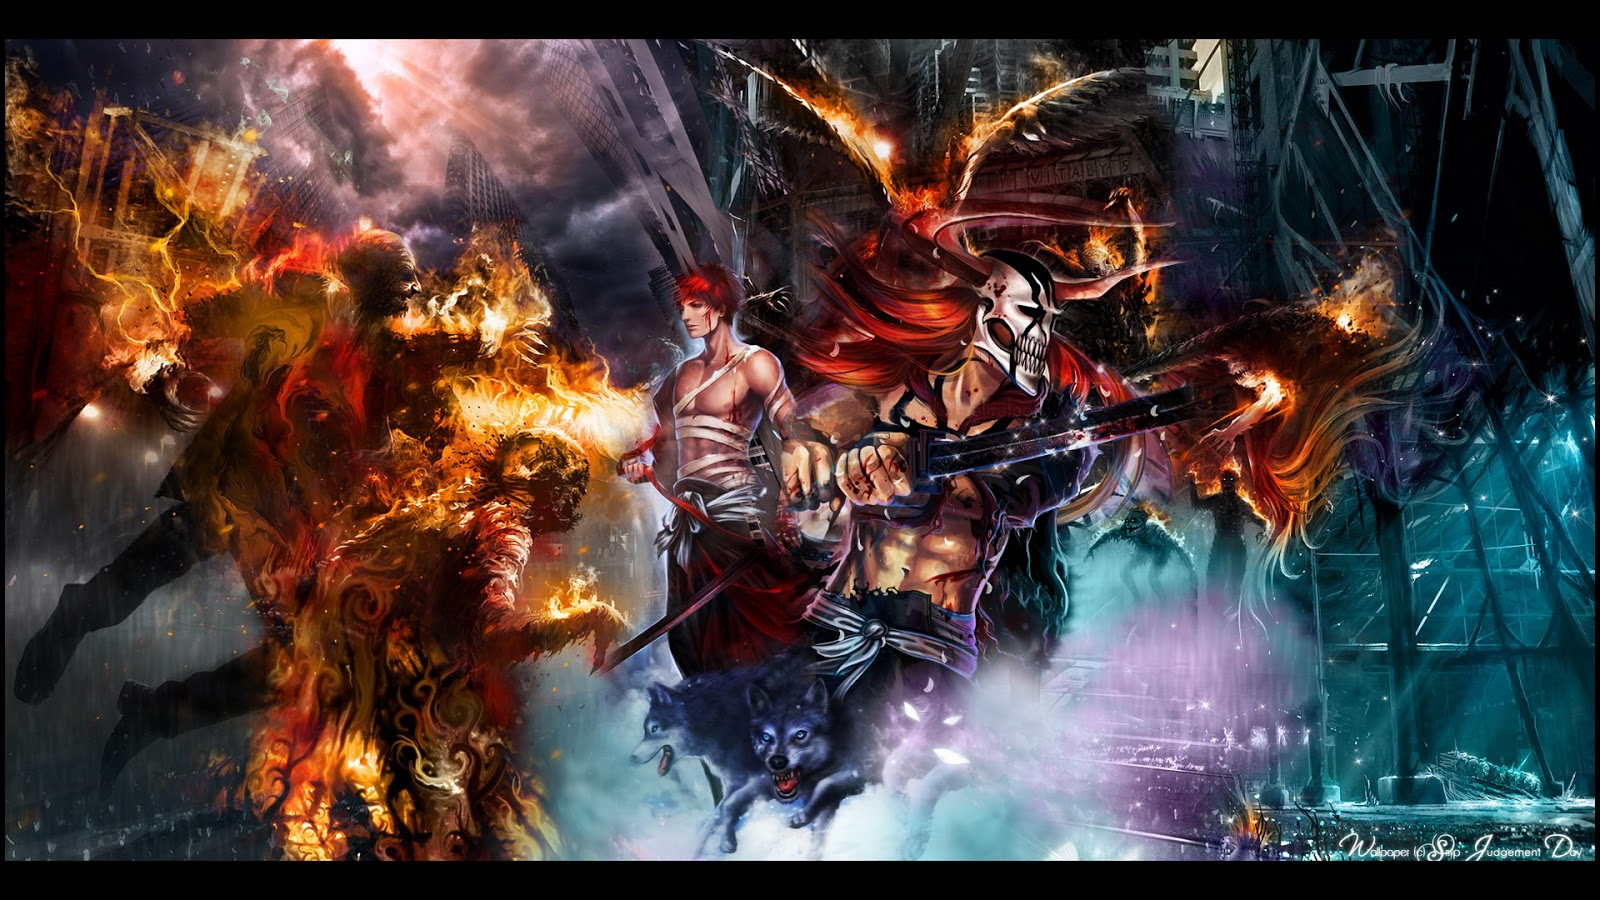 anime wallpaper 1600x900,action adventure game,strategy video game,pc game,cg artwork,games